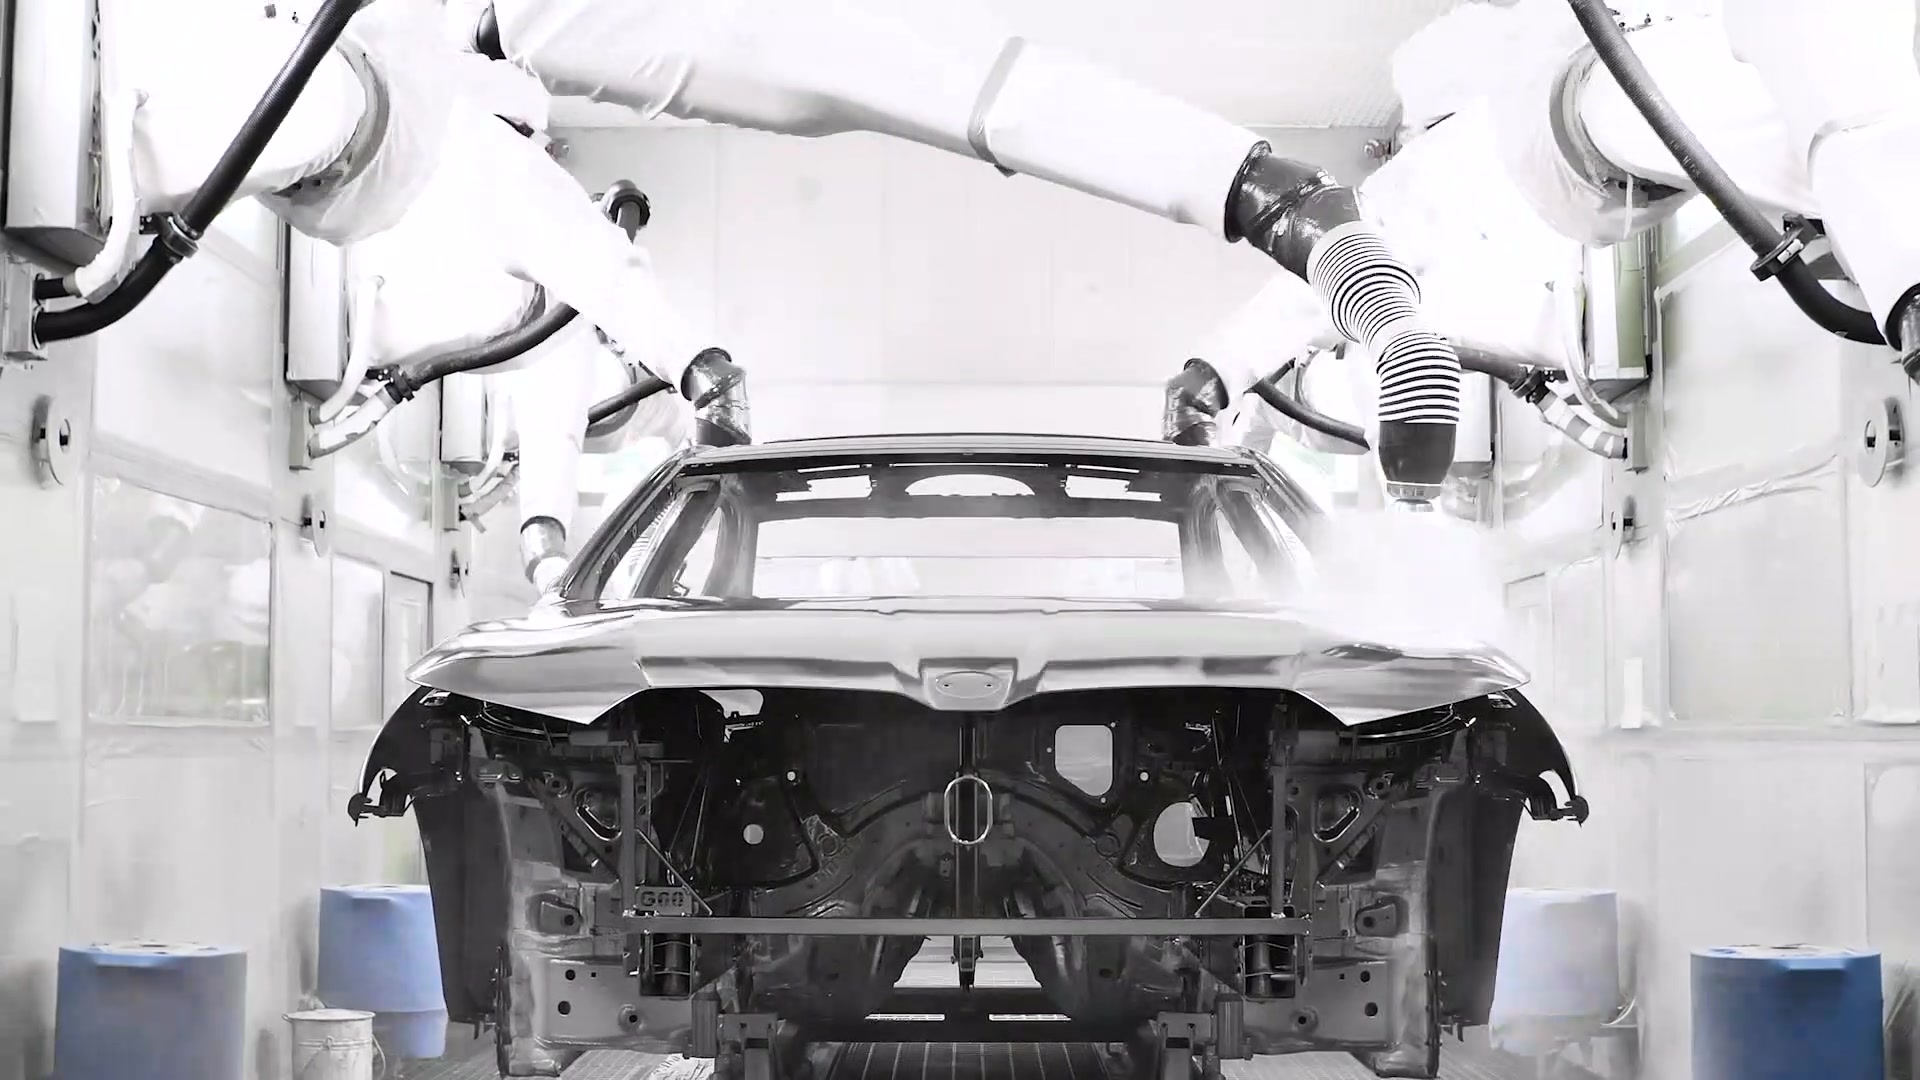 Production of the BMW 5 Series at BMW Group Plant Dingolfing – Paint Shop